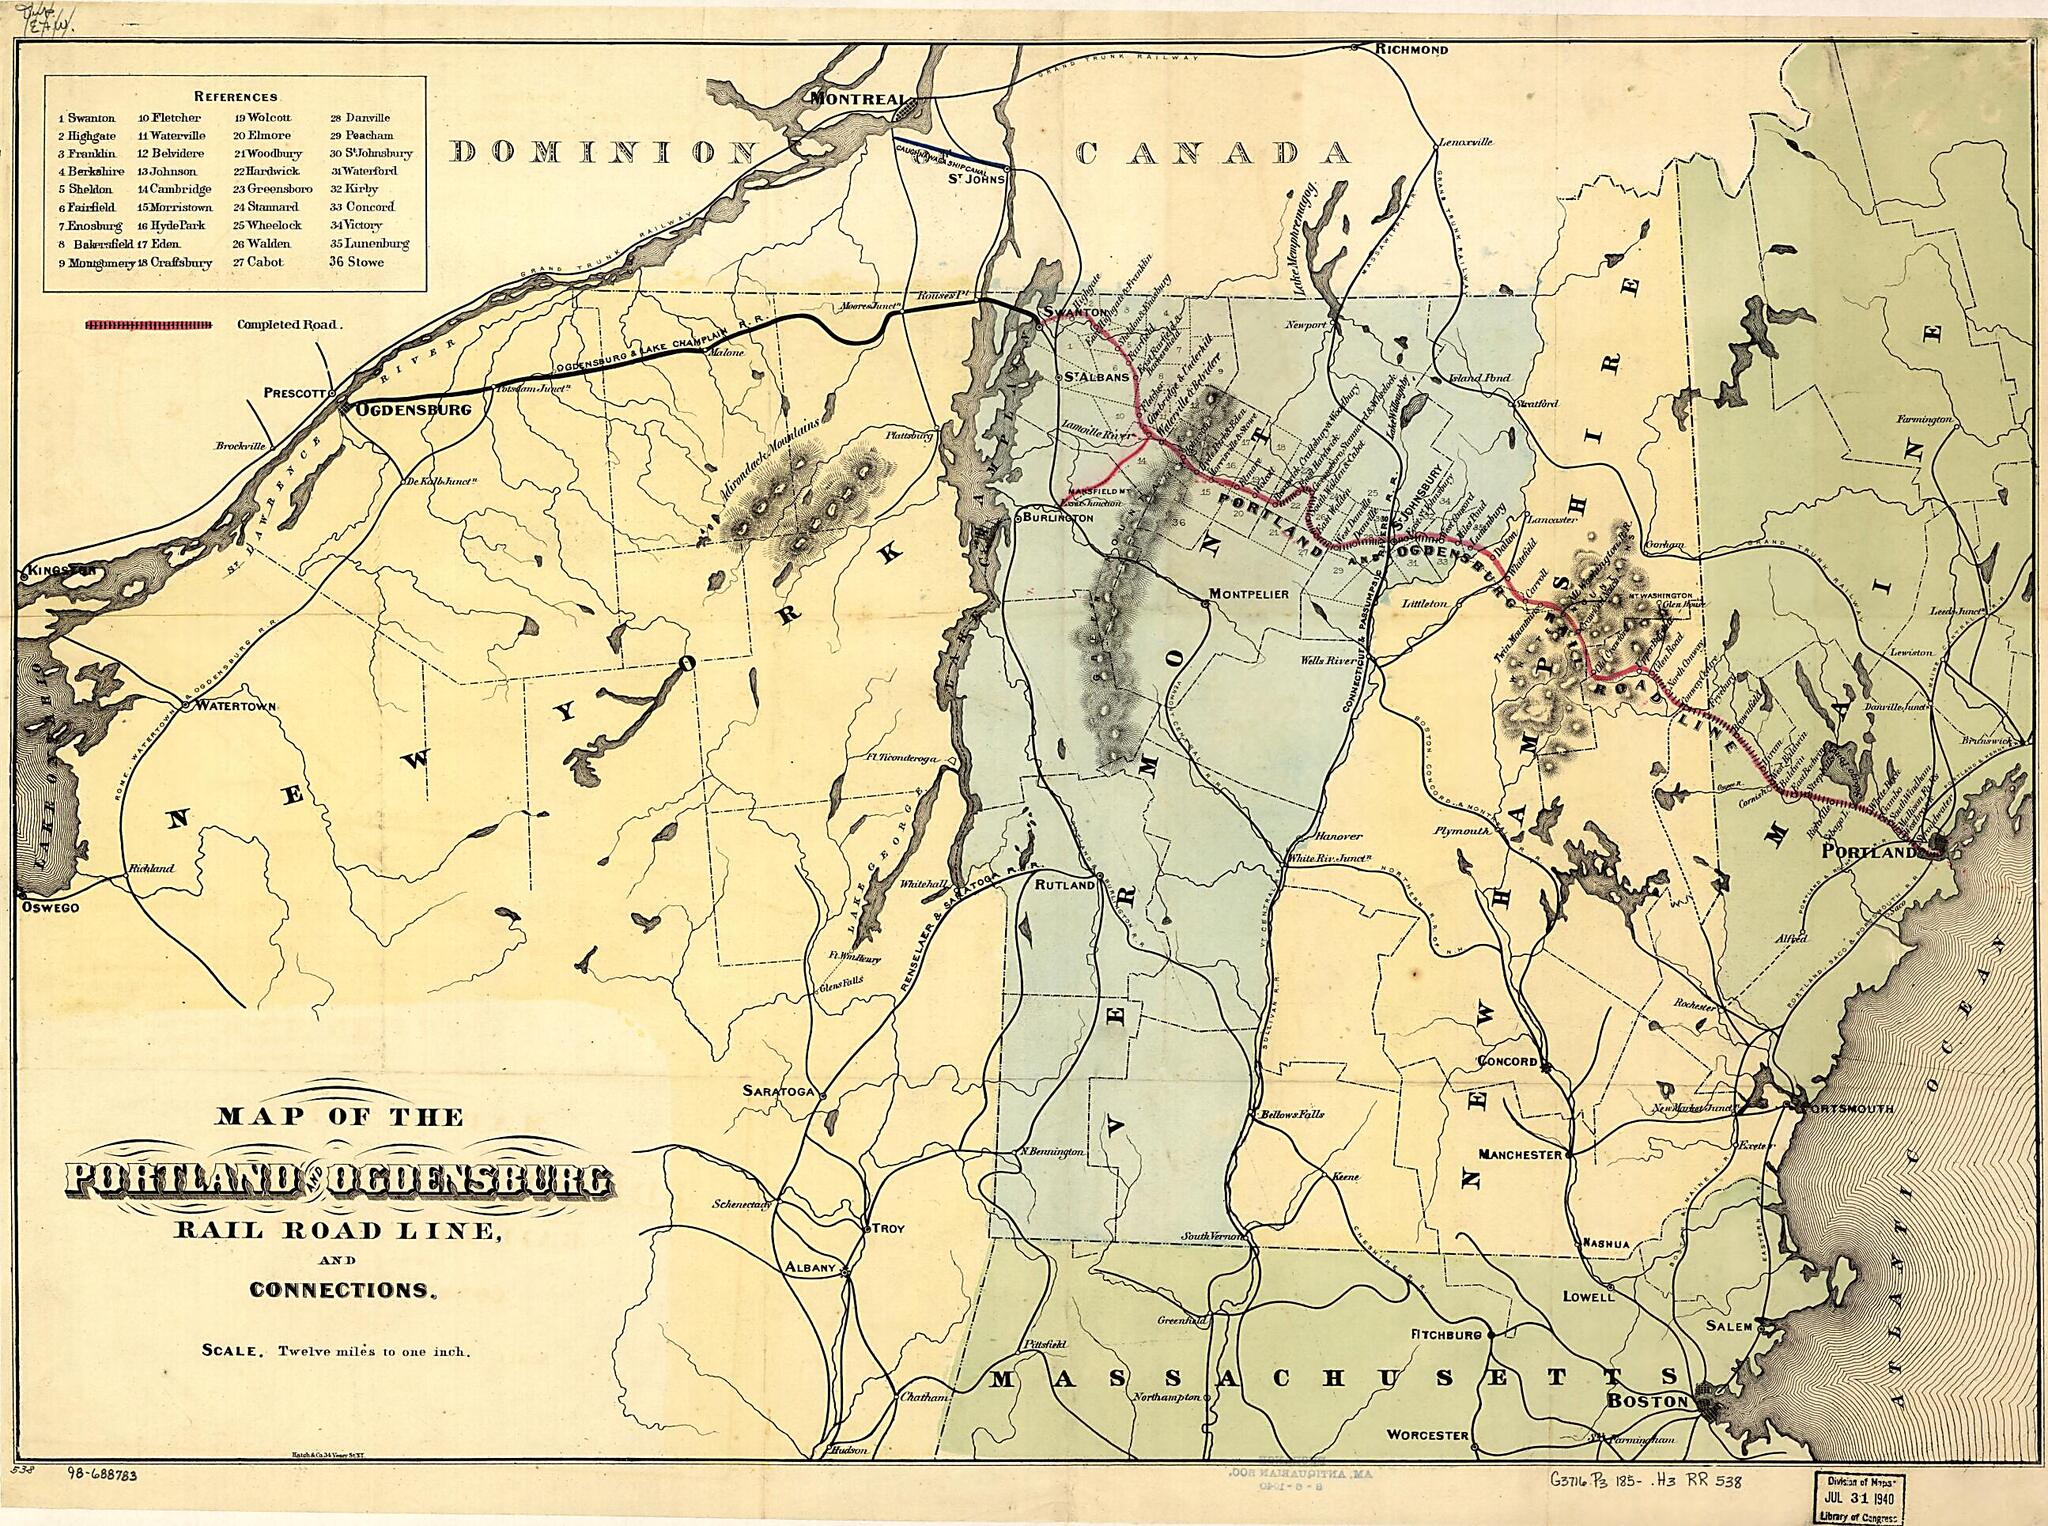 This old map of Map of the Portland and Ogdensburg Rail Road Line, and Connections from 1850 was created by  Hatch &amp; Co,  Portland &amp; Ogdensburg Railroad Company in 1850